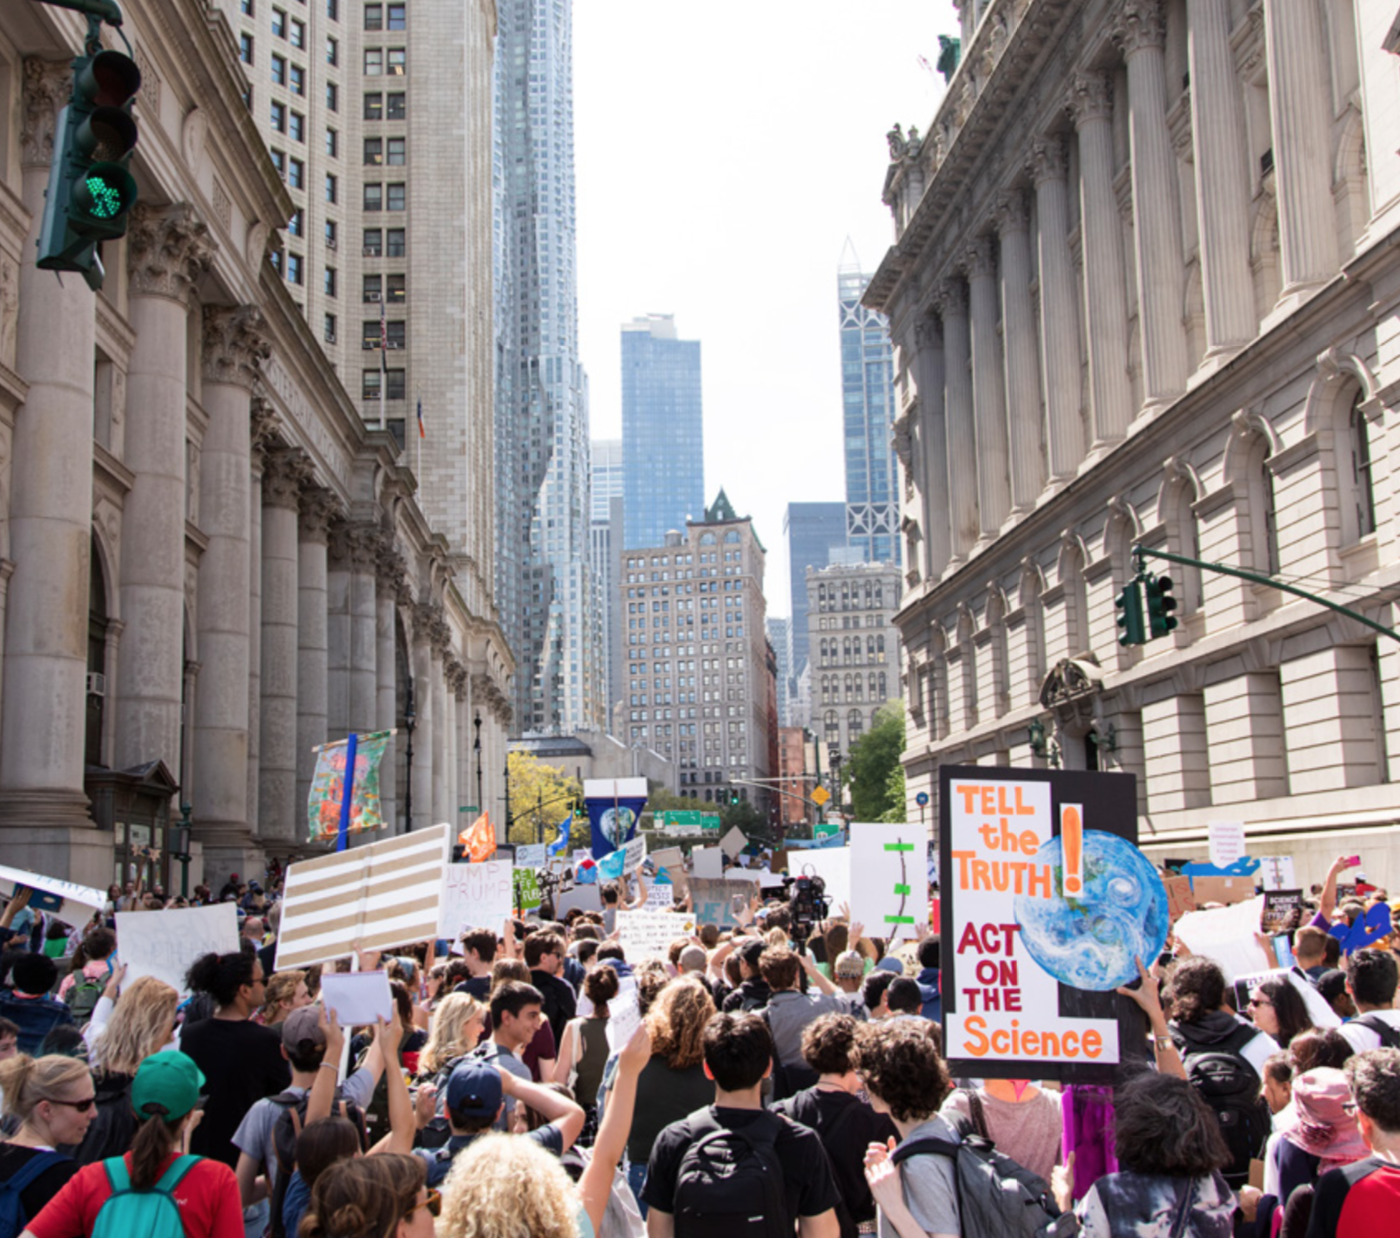 On a New York City street, a crowd of youth hold signs of in support of science and addressing climate change.